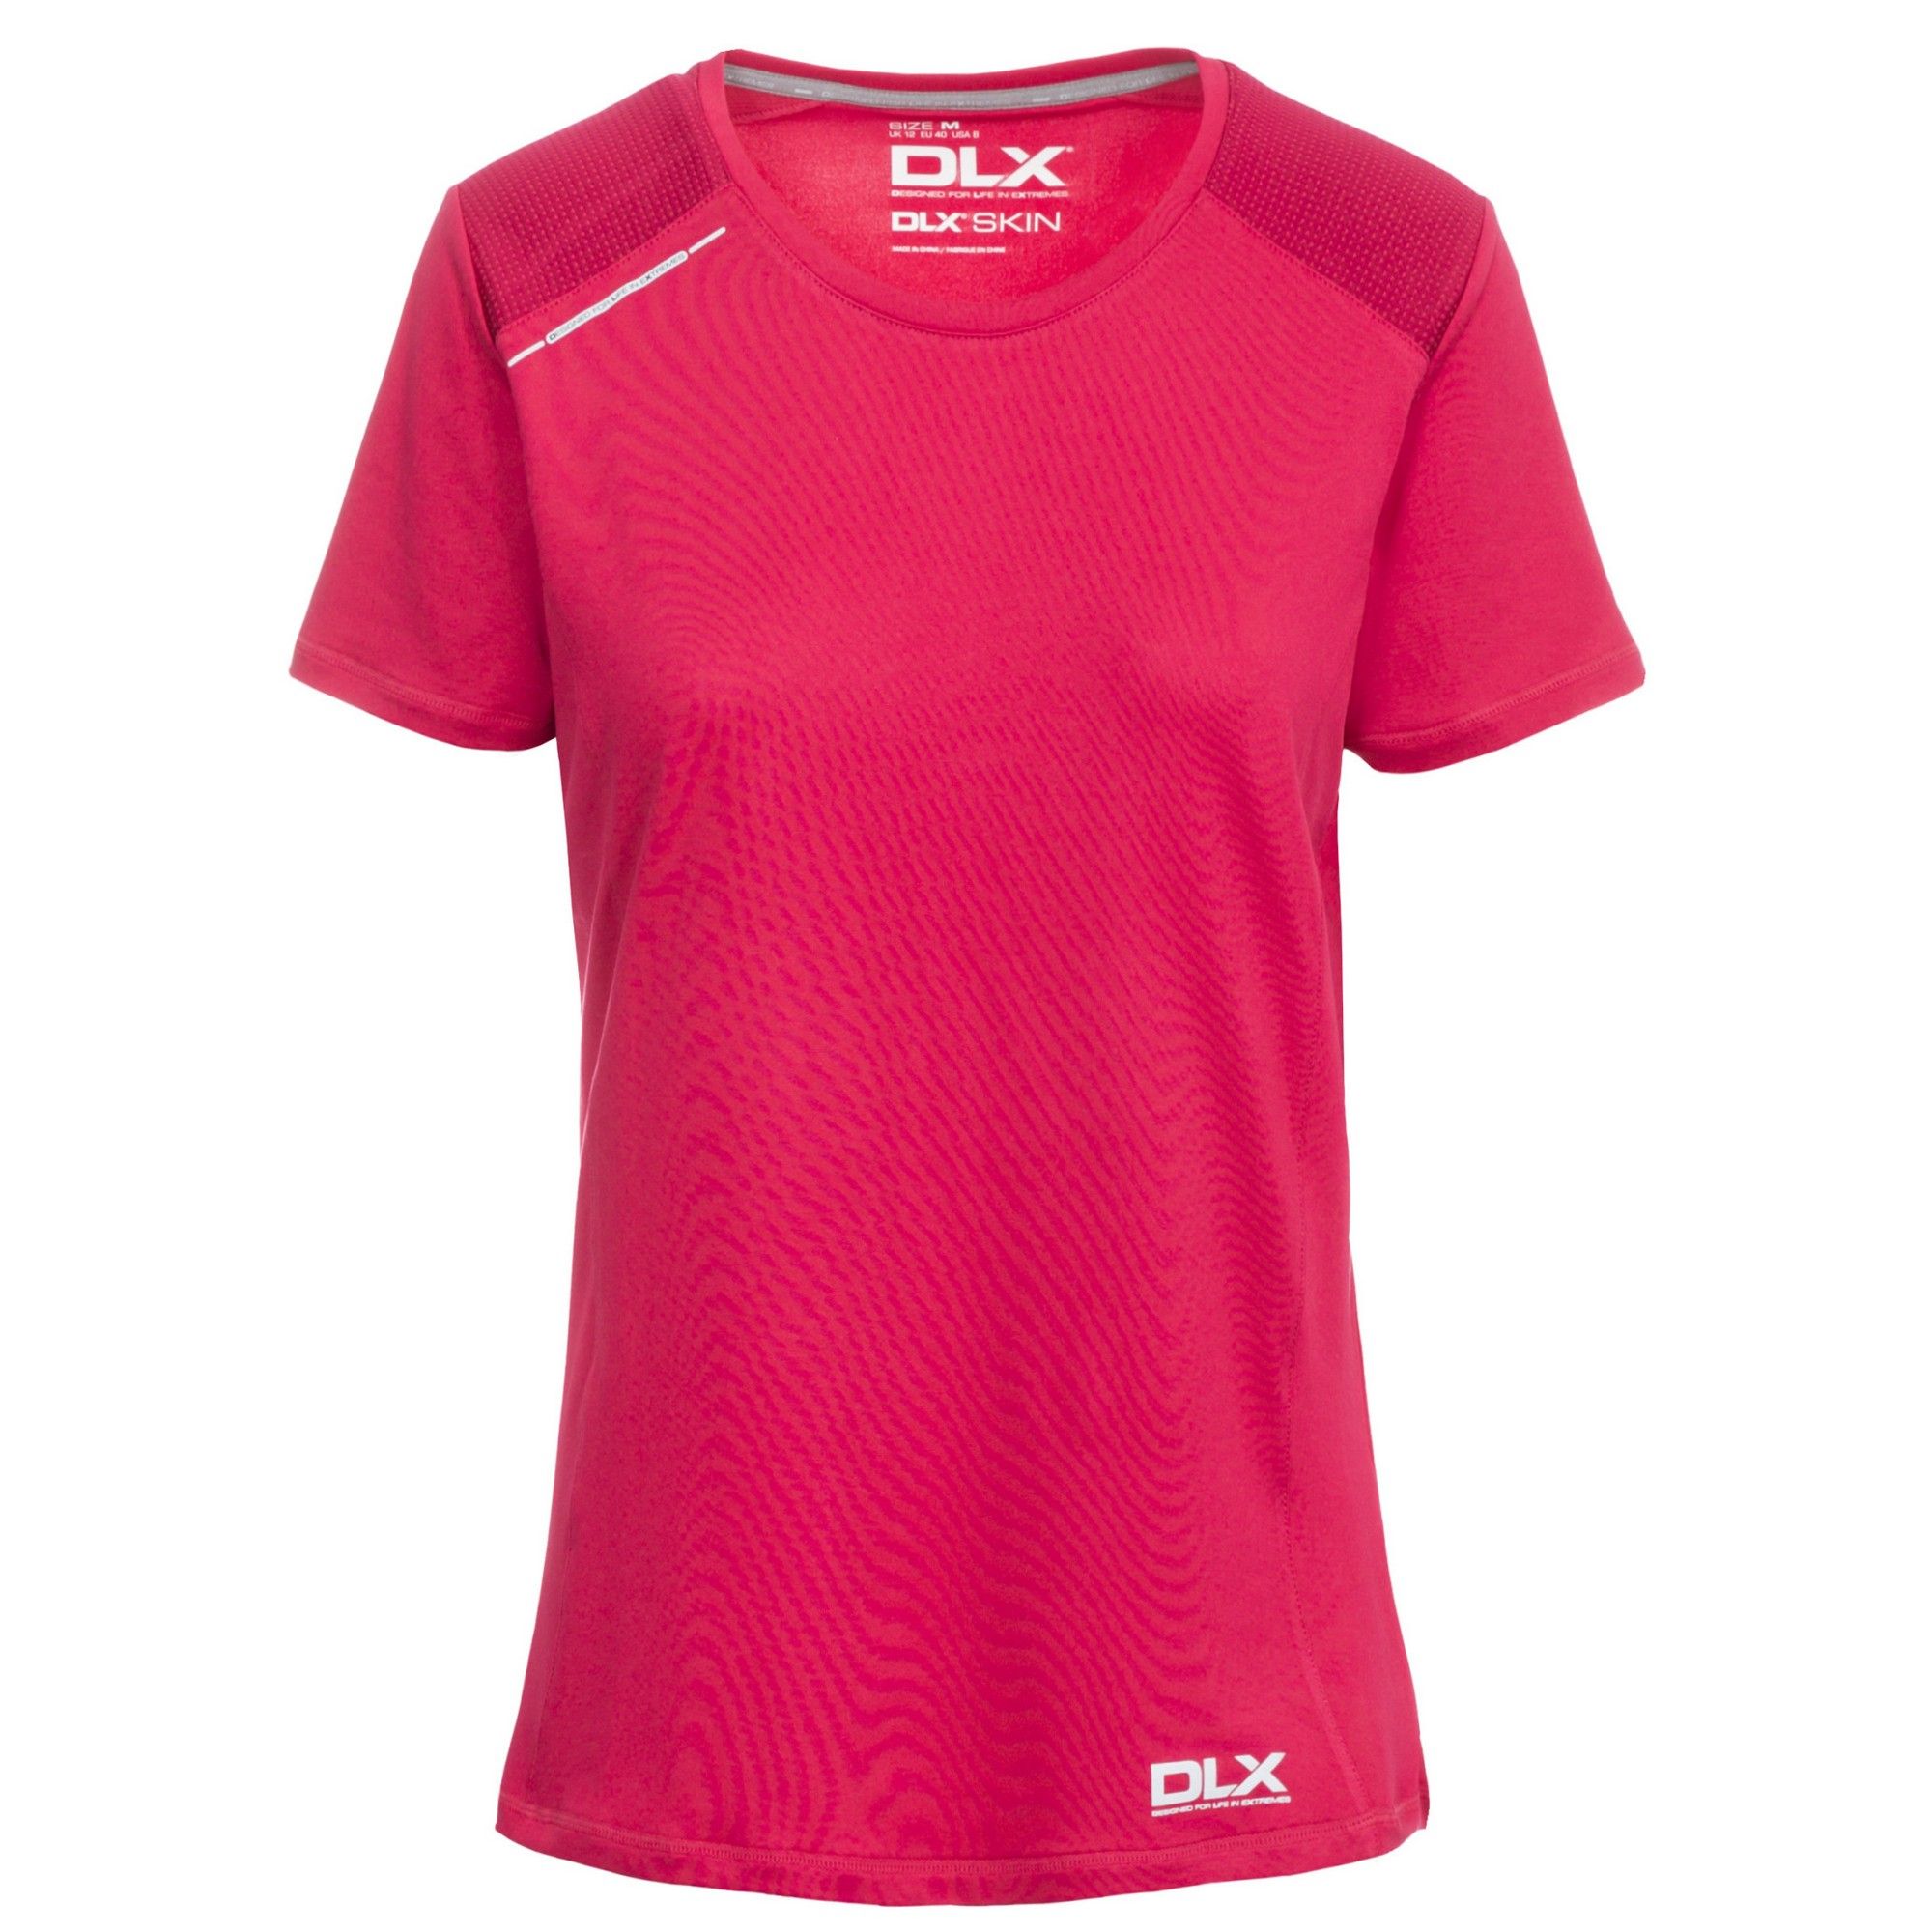 Short sleeves. Round neck. Contrast shoulder panels. Laser cut ventilation on centre back. Reflective printed logos. Quick dry. 95% Polyester/5% Elastane. Trespass Womens Chest Sizing (approx): XS/8 - 32in/81cm, S/10 - 34in/86cm, M/12 - 36in/91.4cm, L/14 - 38in/96.5cm, XL/16 - 40in/101.5cm, XXL/18 - 42in/106.5cm.